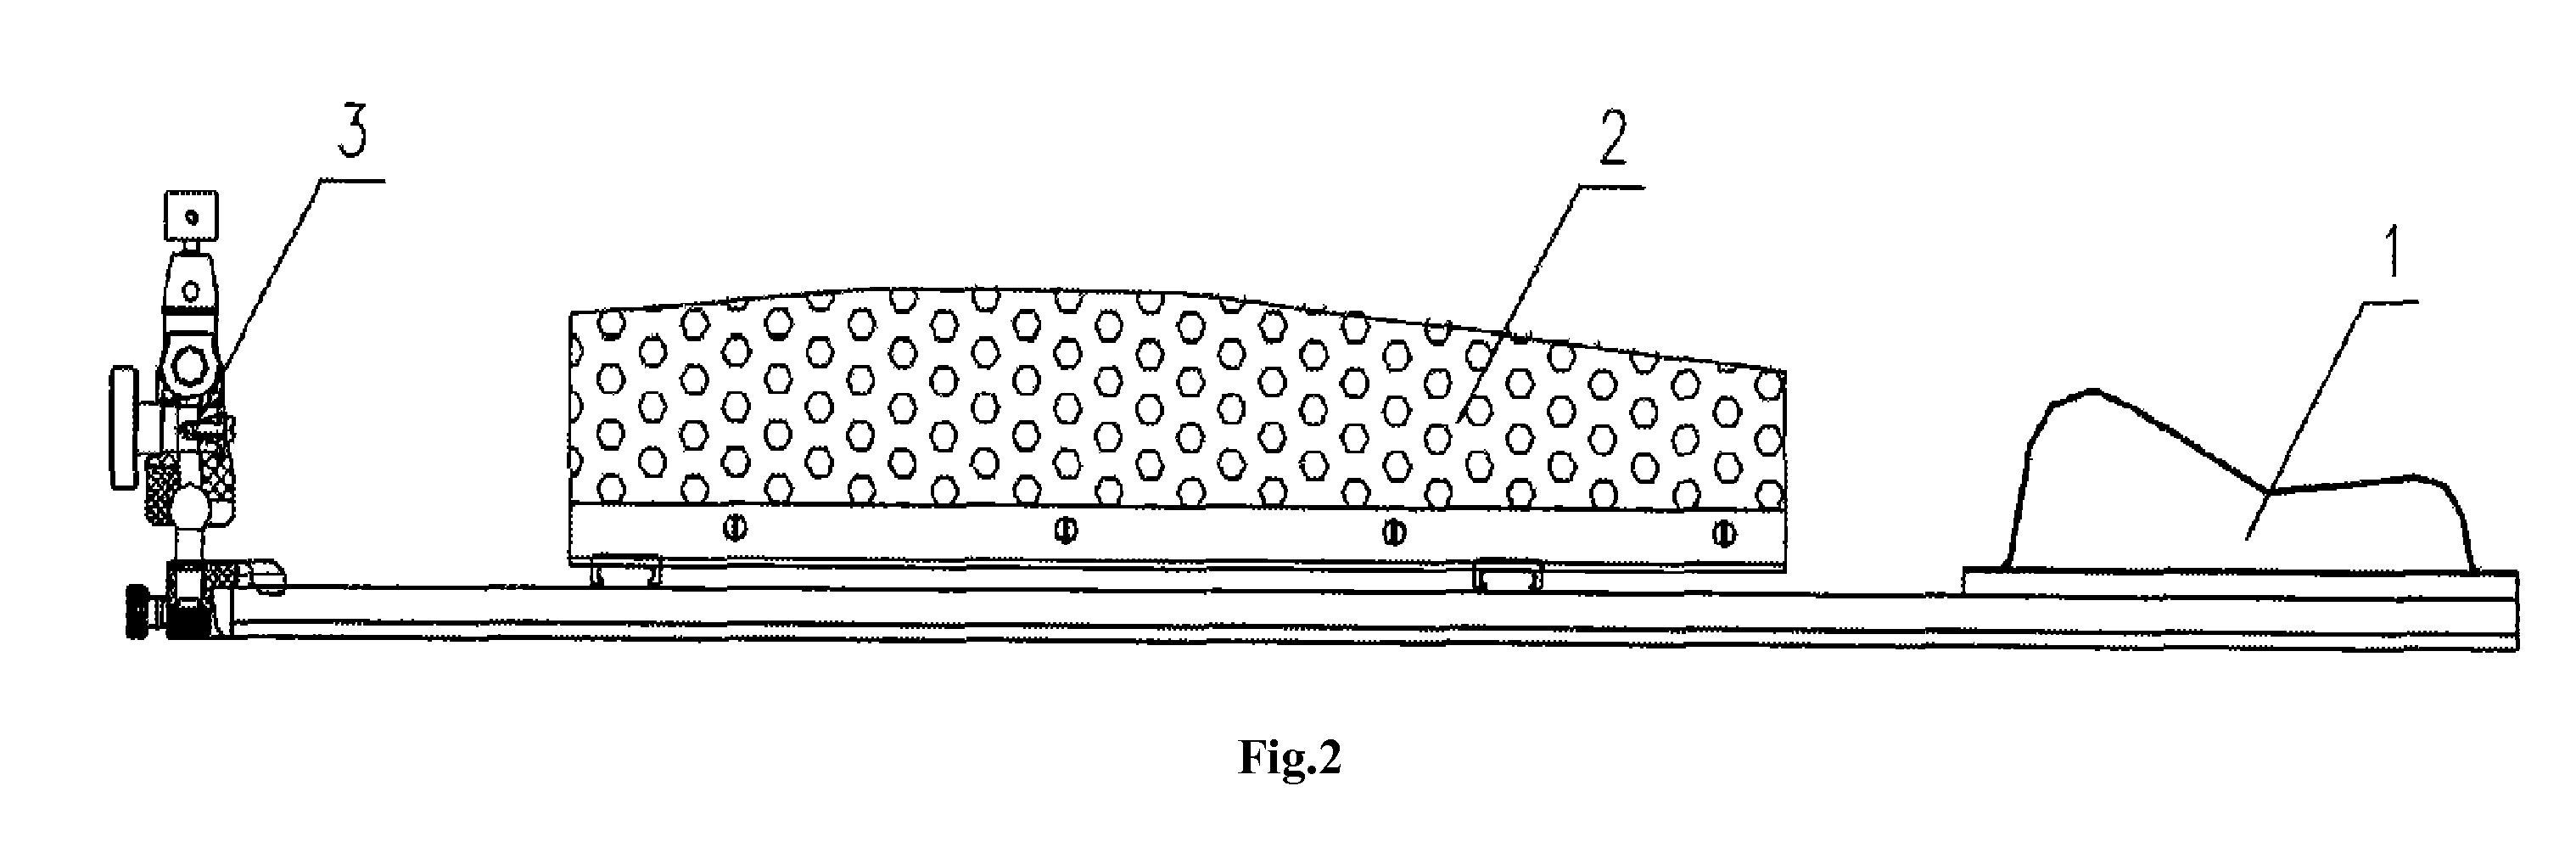 Lithotomy position afterloading carbon fiber treatment couch under image guidance